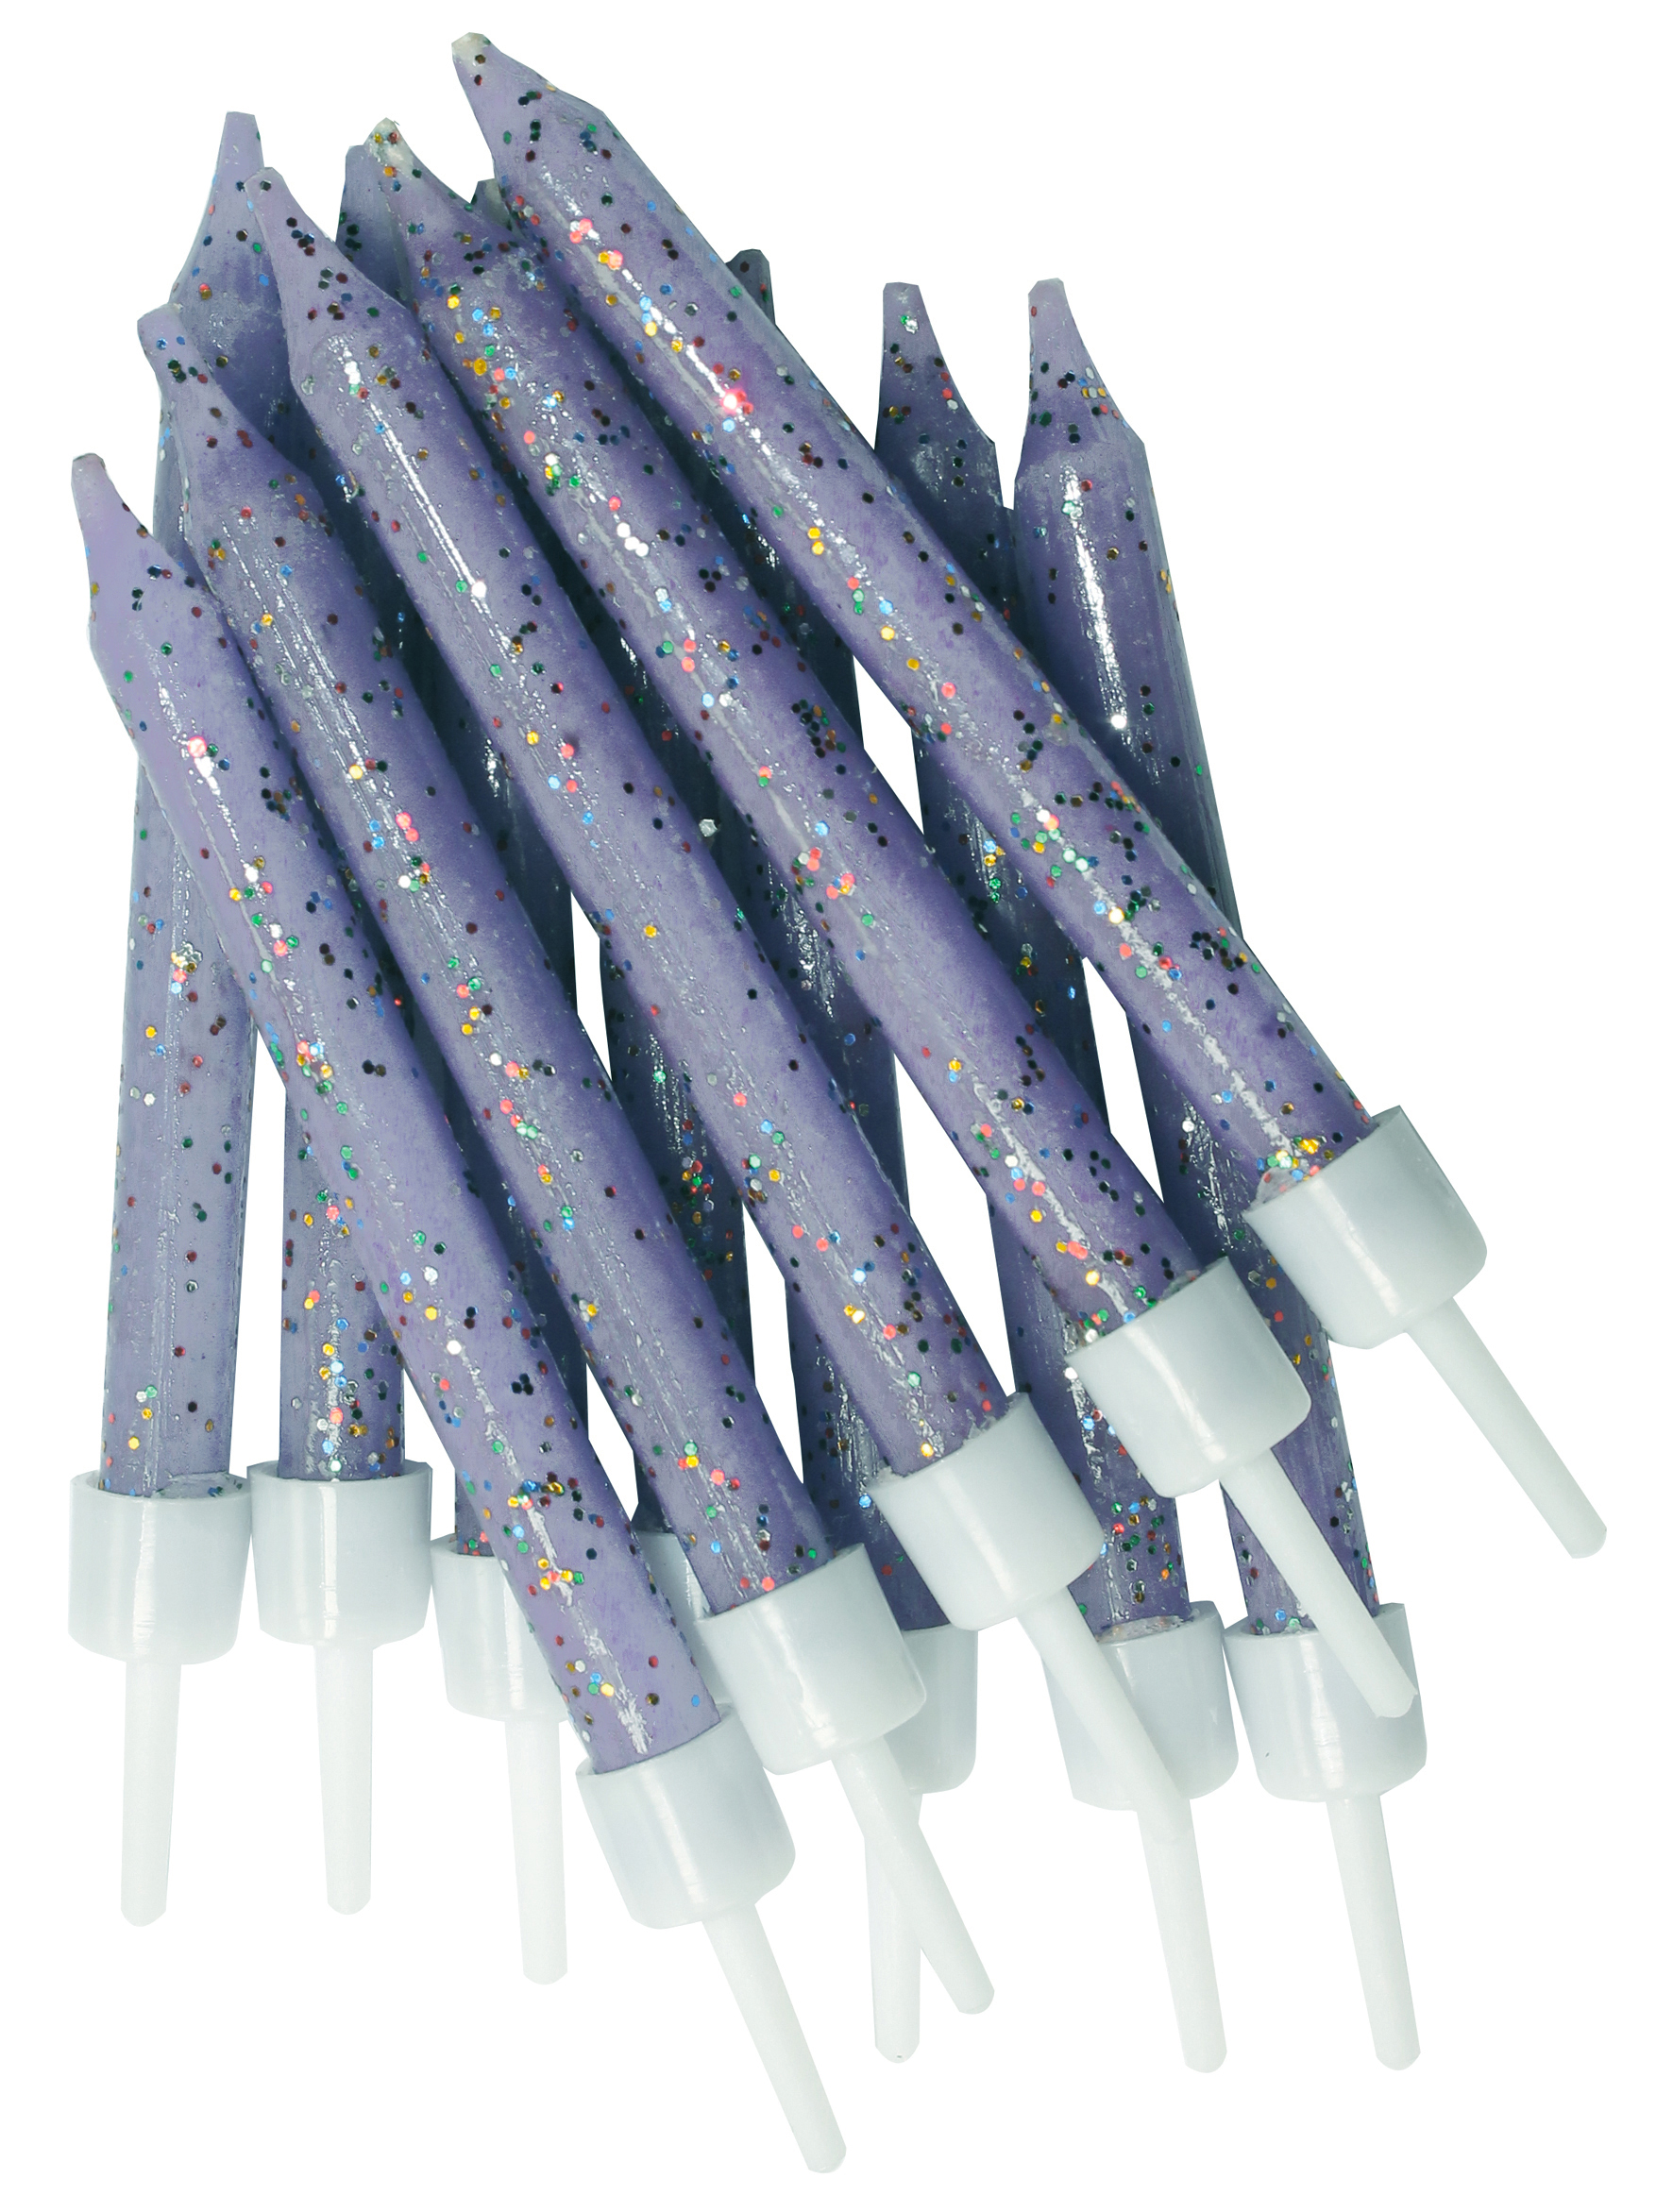 12 glitter candle lila - 7,5 cm with holders